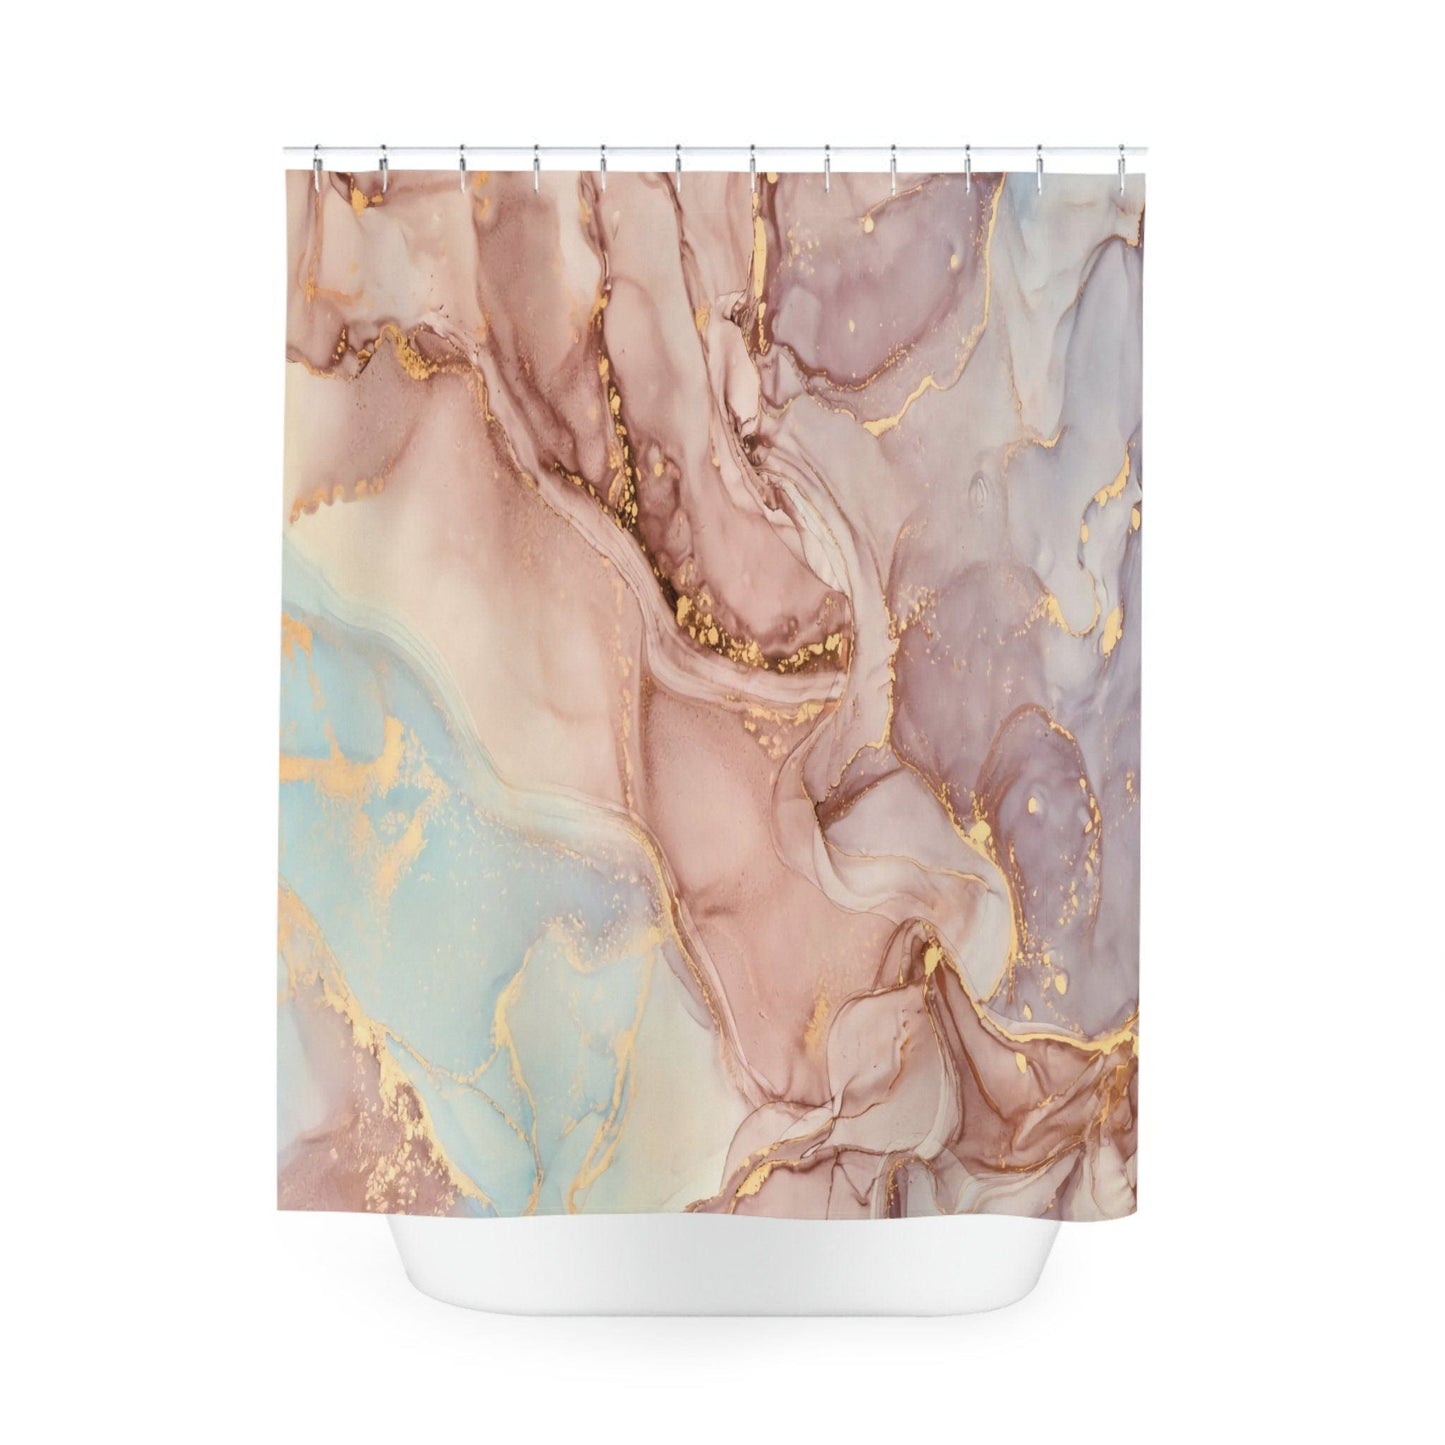 Kate McEnroe New York Shower Curtain in Pastel Peach, Blue, Gold Marble Print, Custom Designed, Waterproof, Machine Washable Standard Fit Bath Curtains Shower Curtains